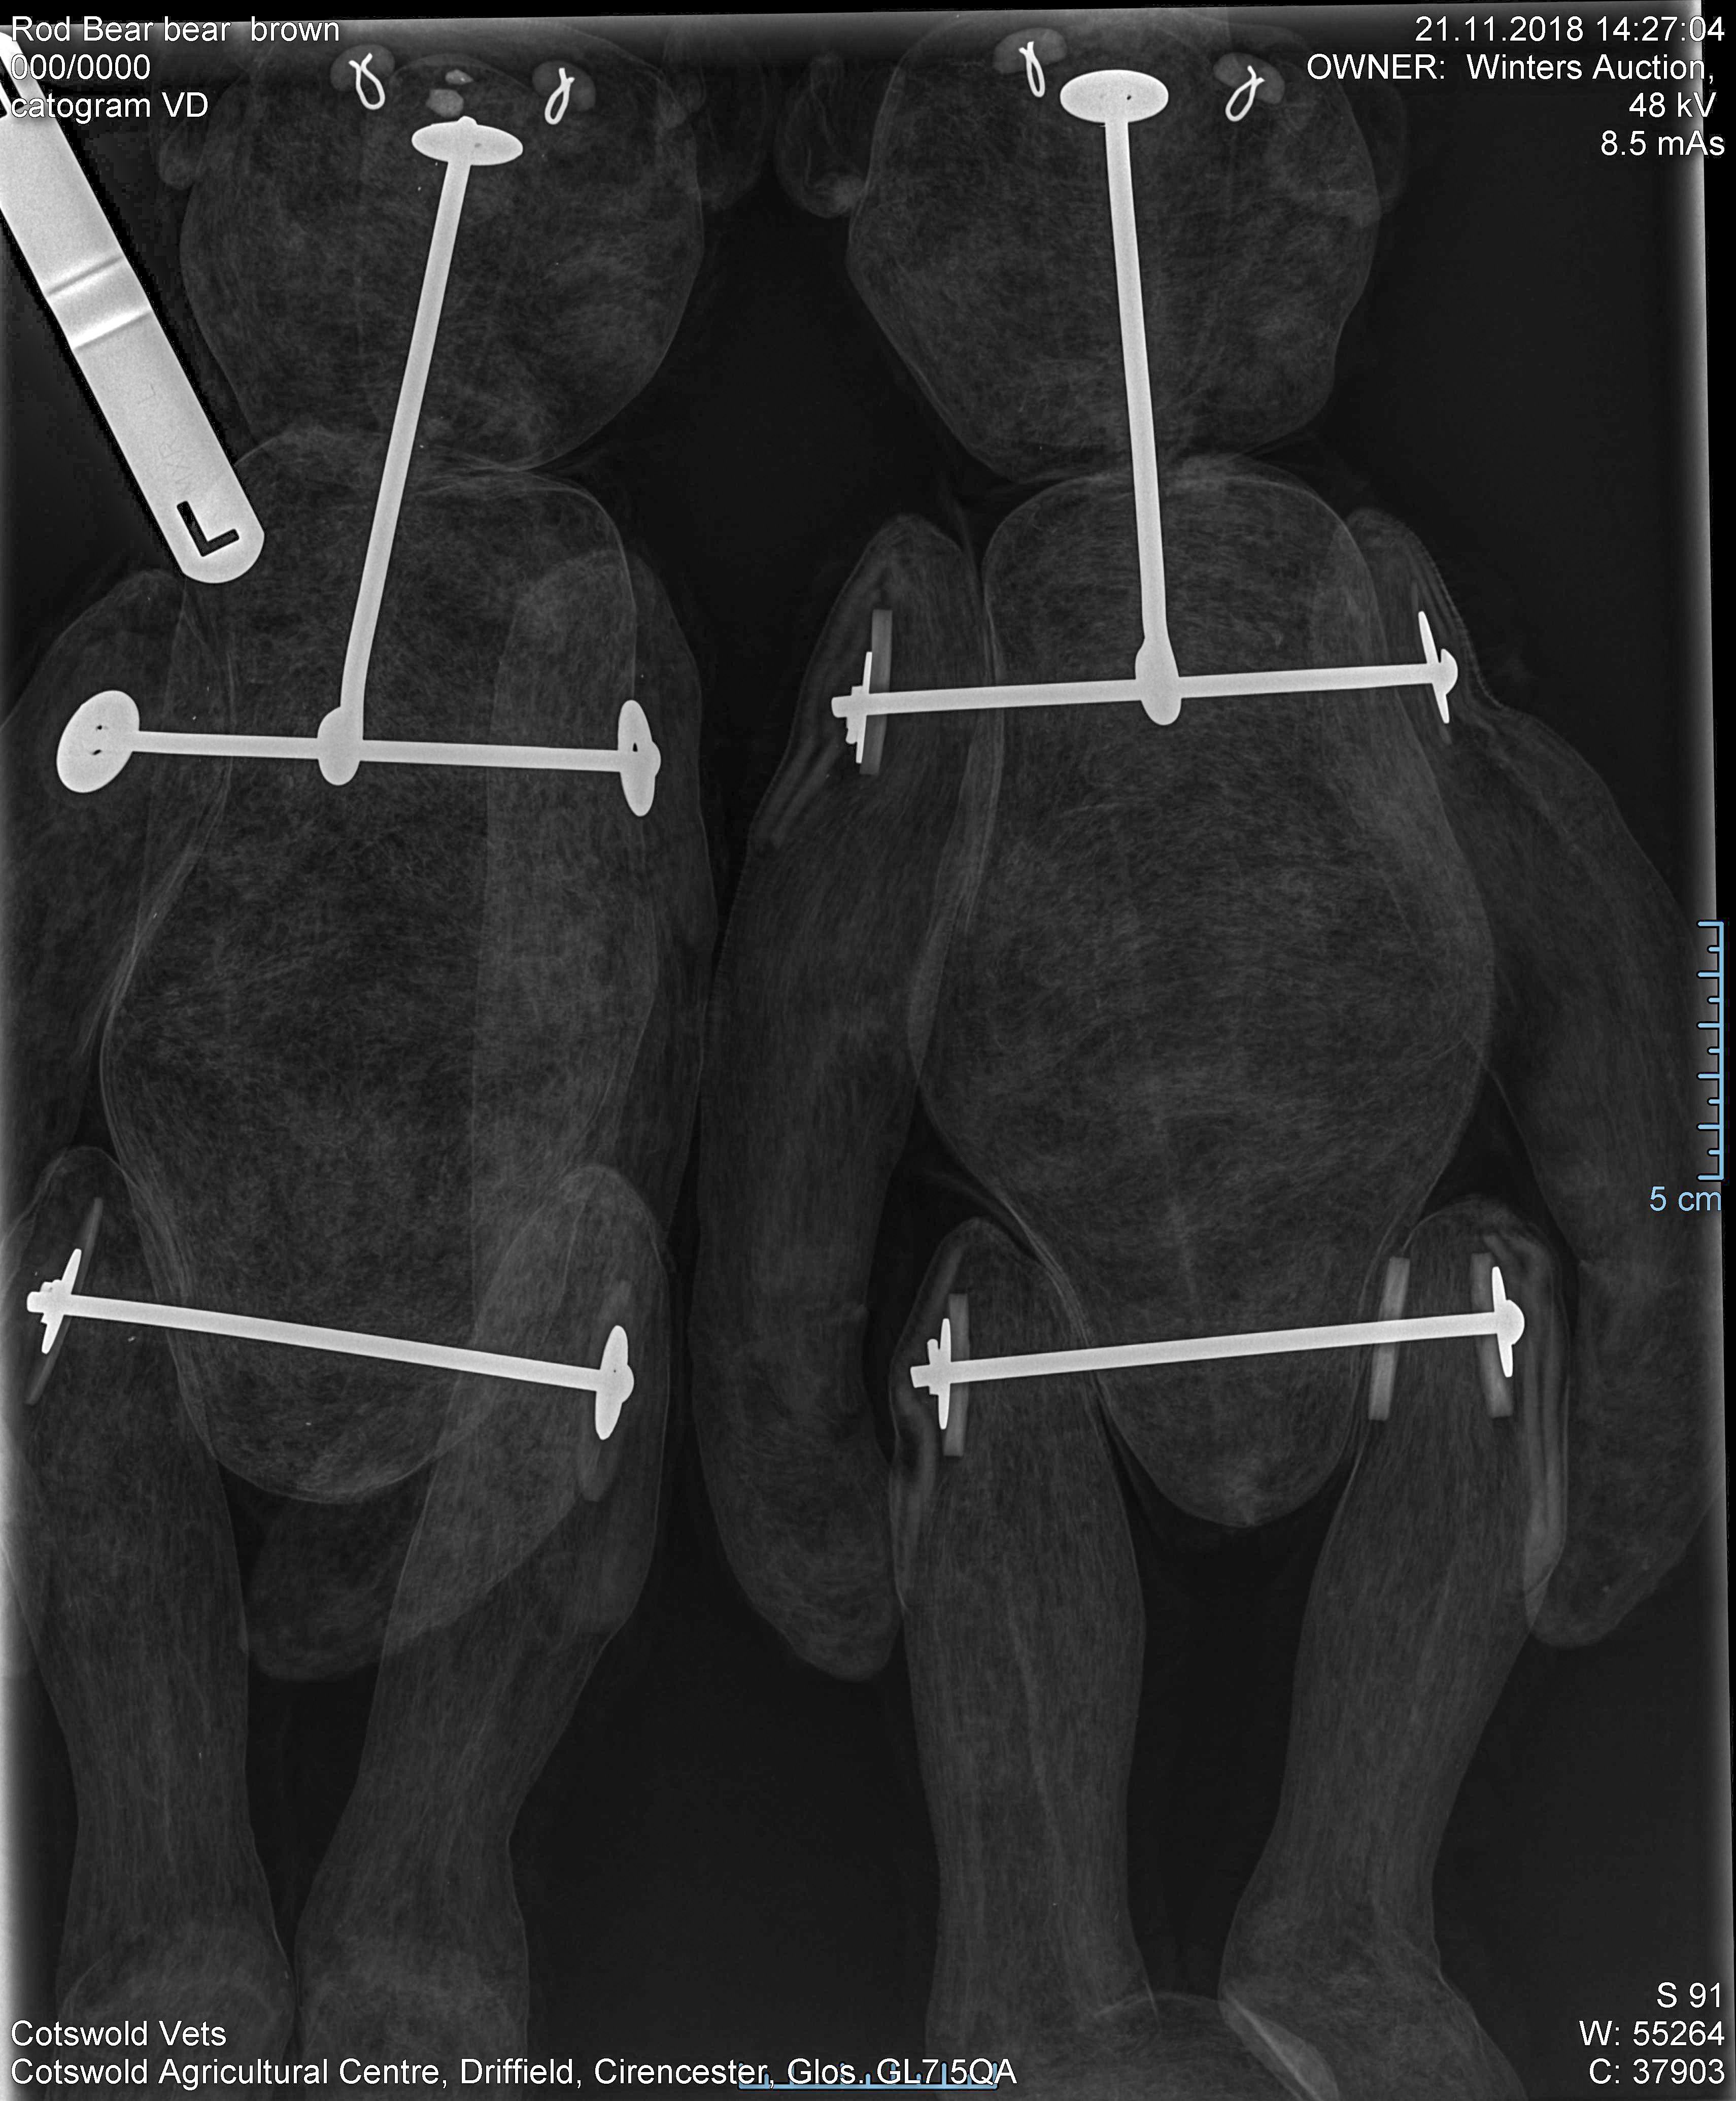 X-rays proved the provenance of the two bears (Dominic Winter Auctioneers/PA).